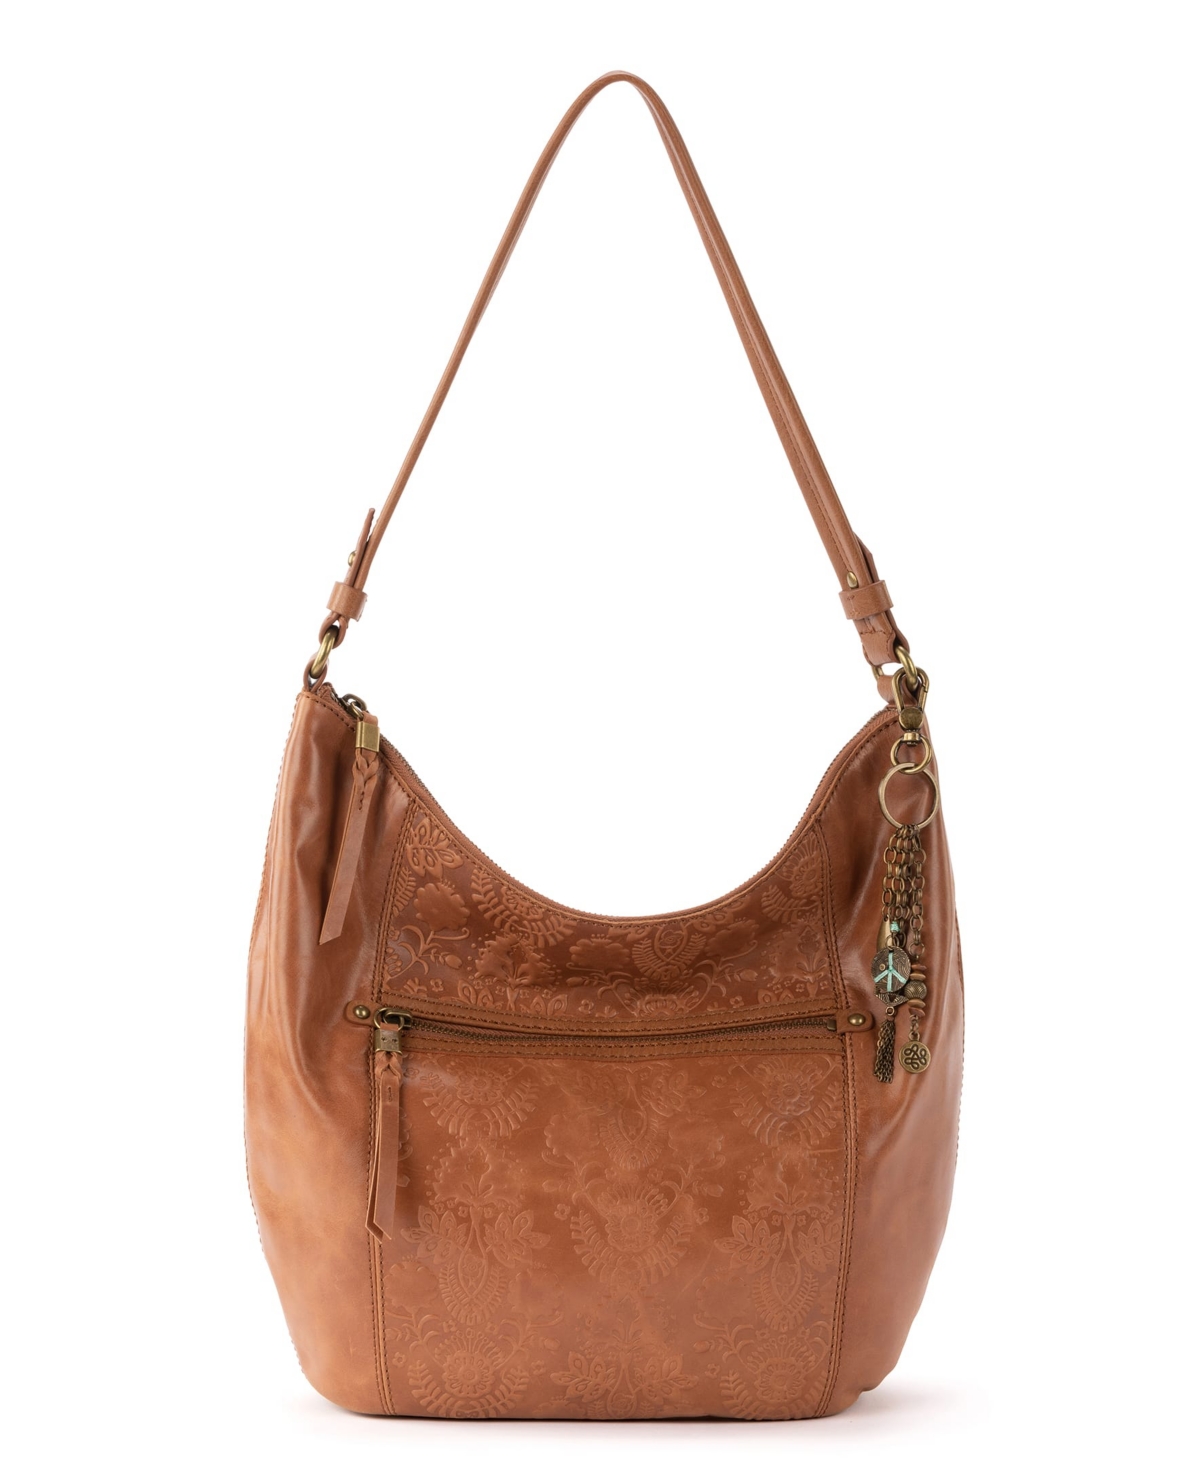 The Sak Women's Sequoia Leather Hobo In Tobacco Floral Emboss